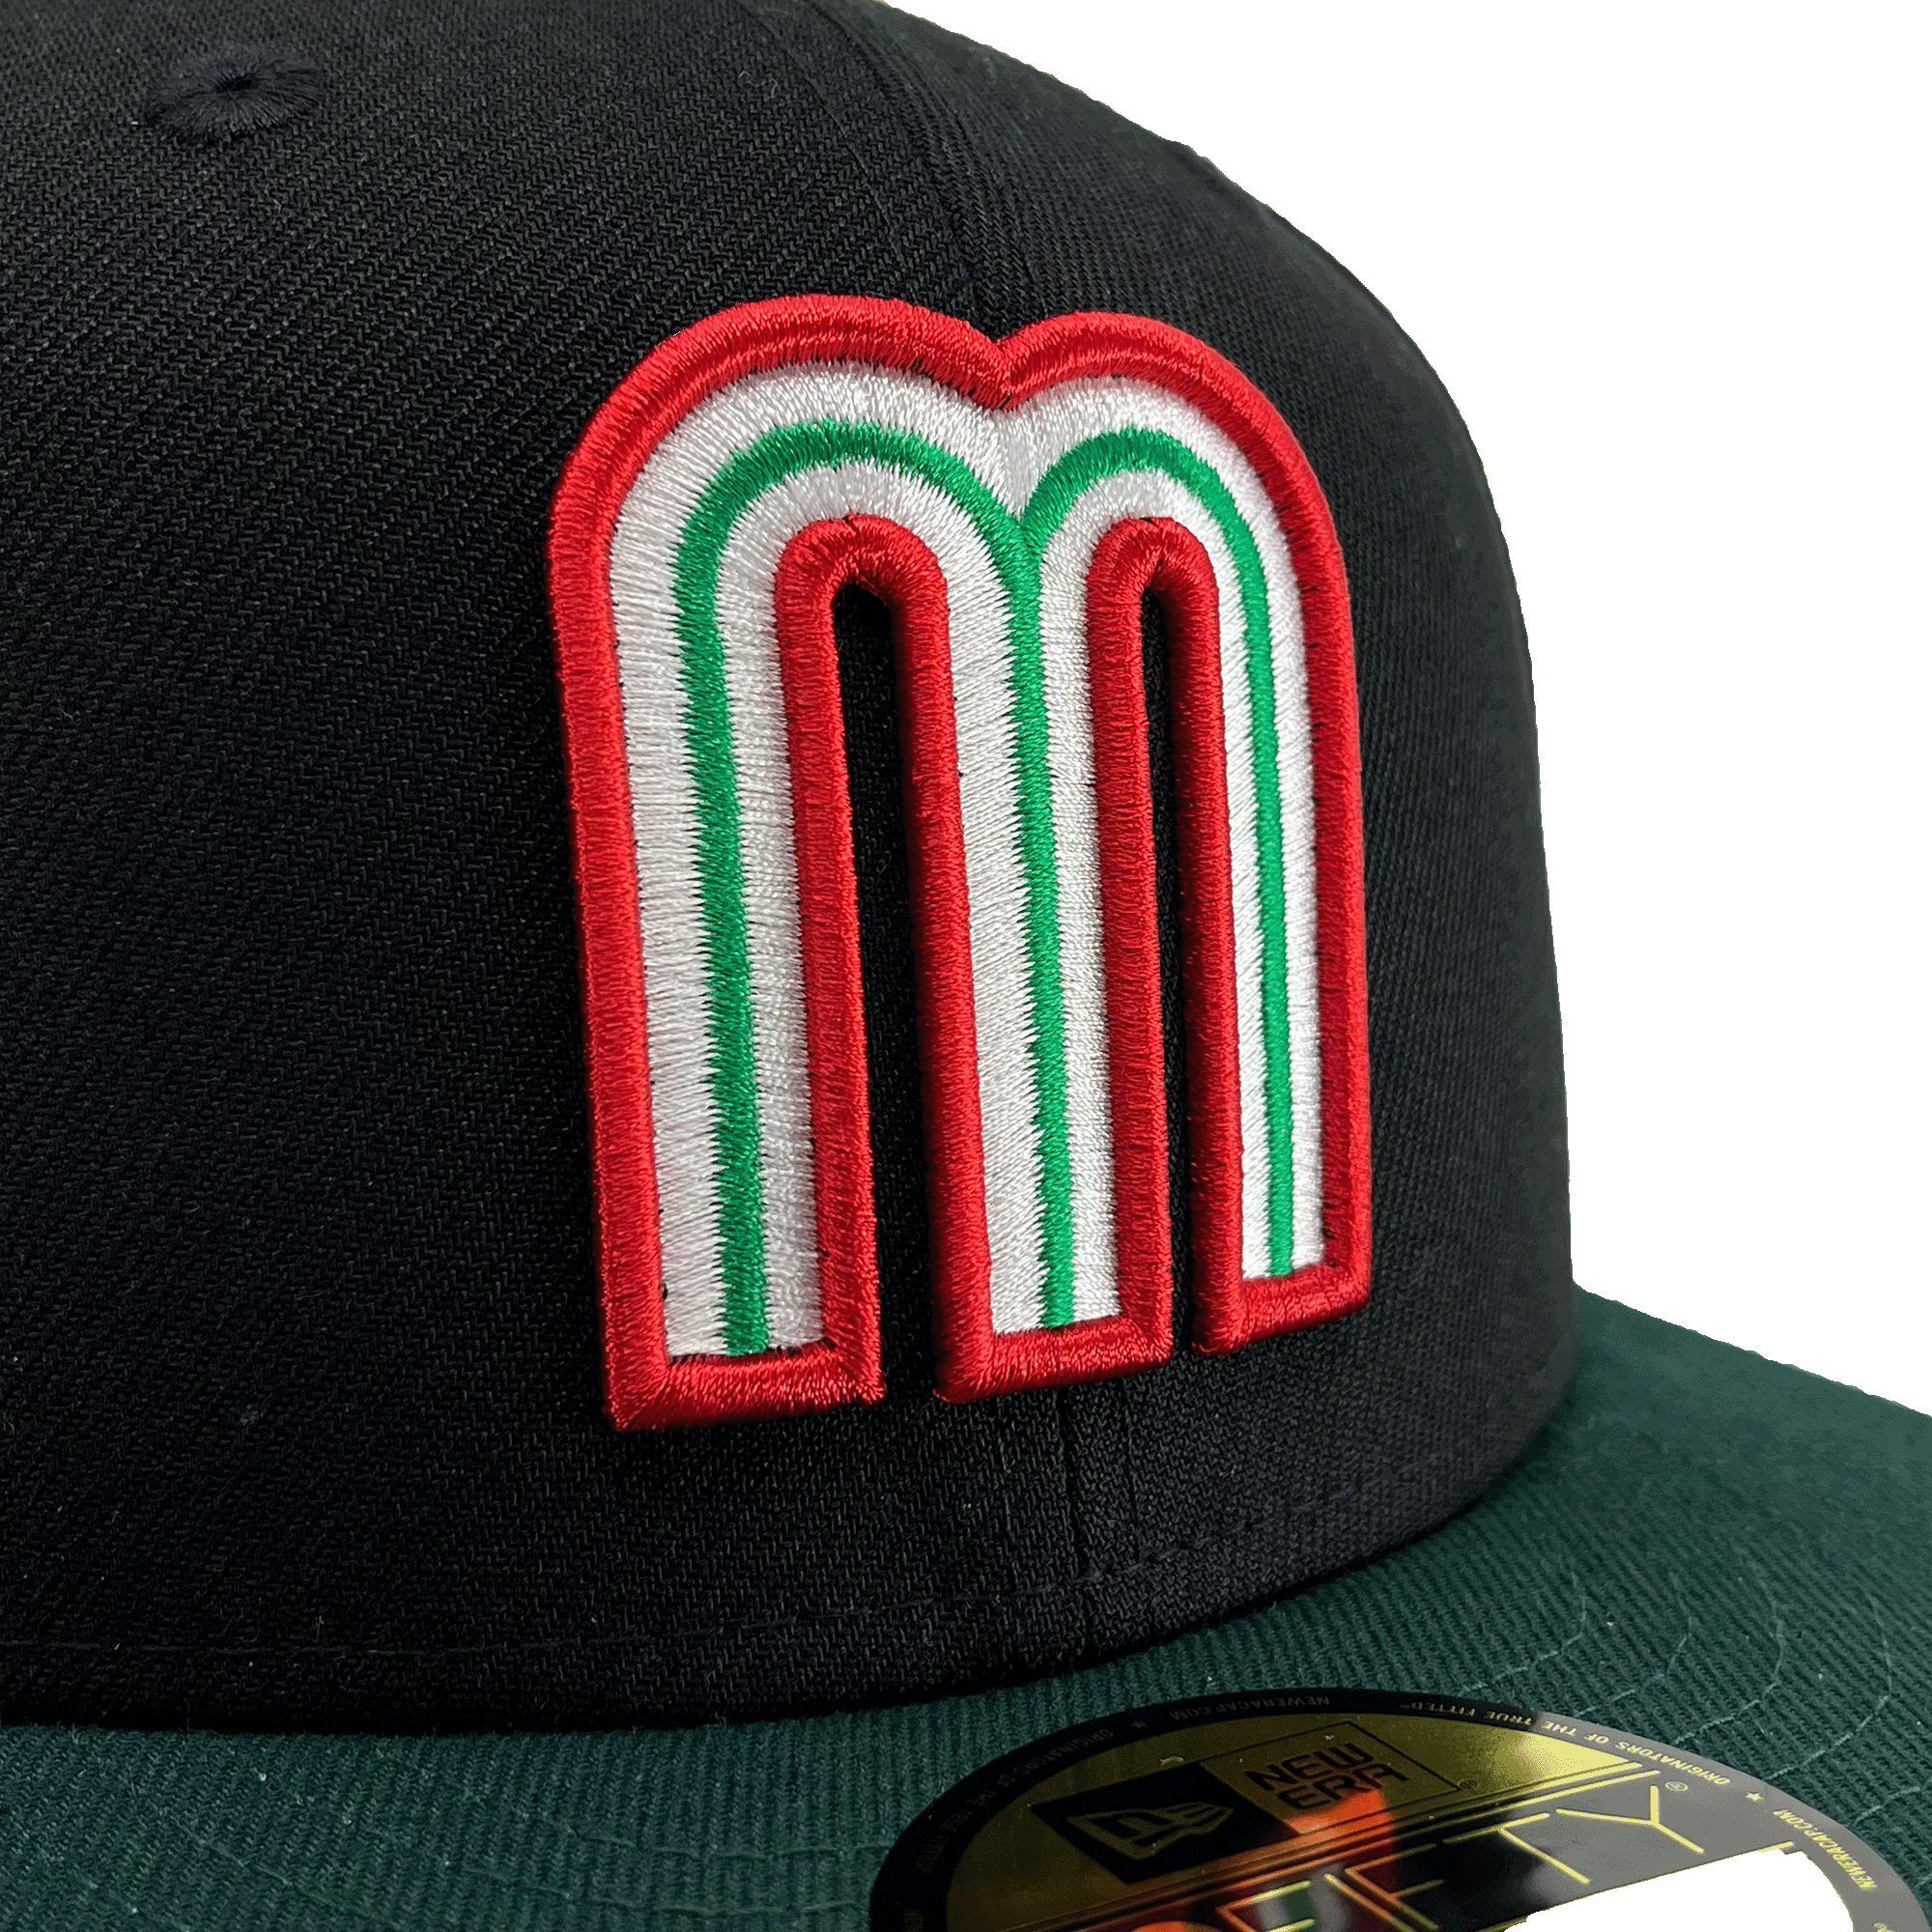 Detailed side embroidery of M.